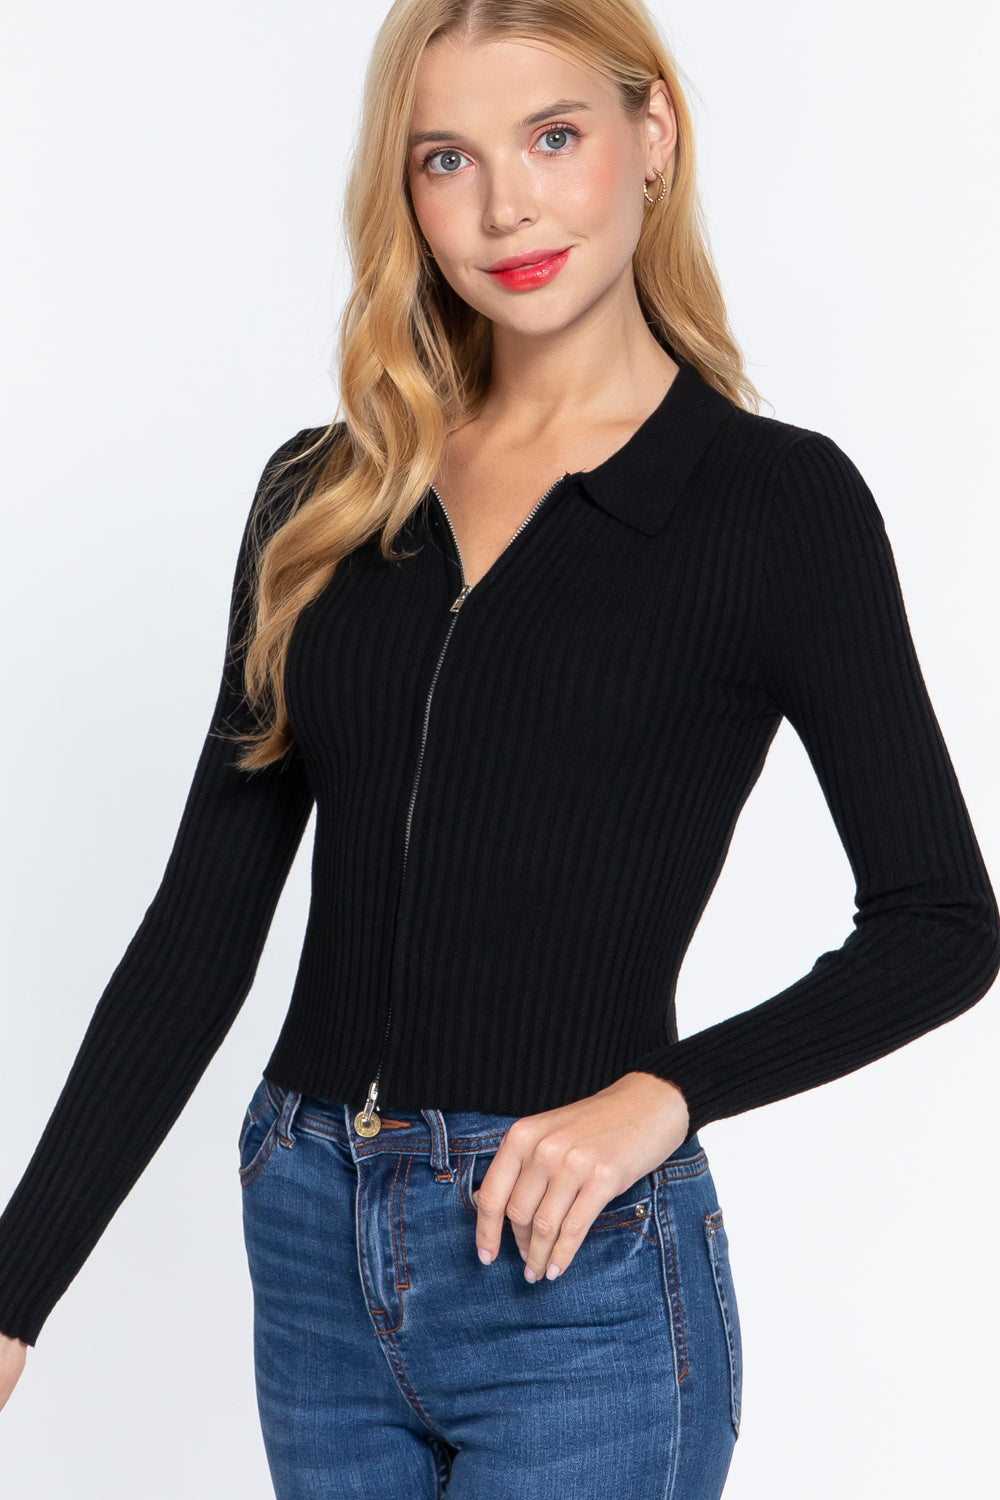 Black Notched Collar Front Zip Long Sleeve Slim Fit Stretchy Knit Sweater Top_ Shirts & Tops jehouze 